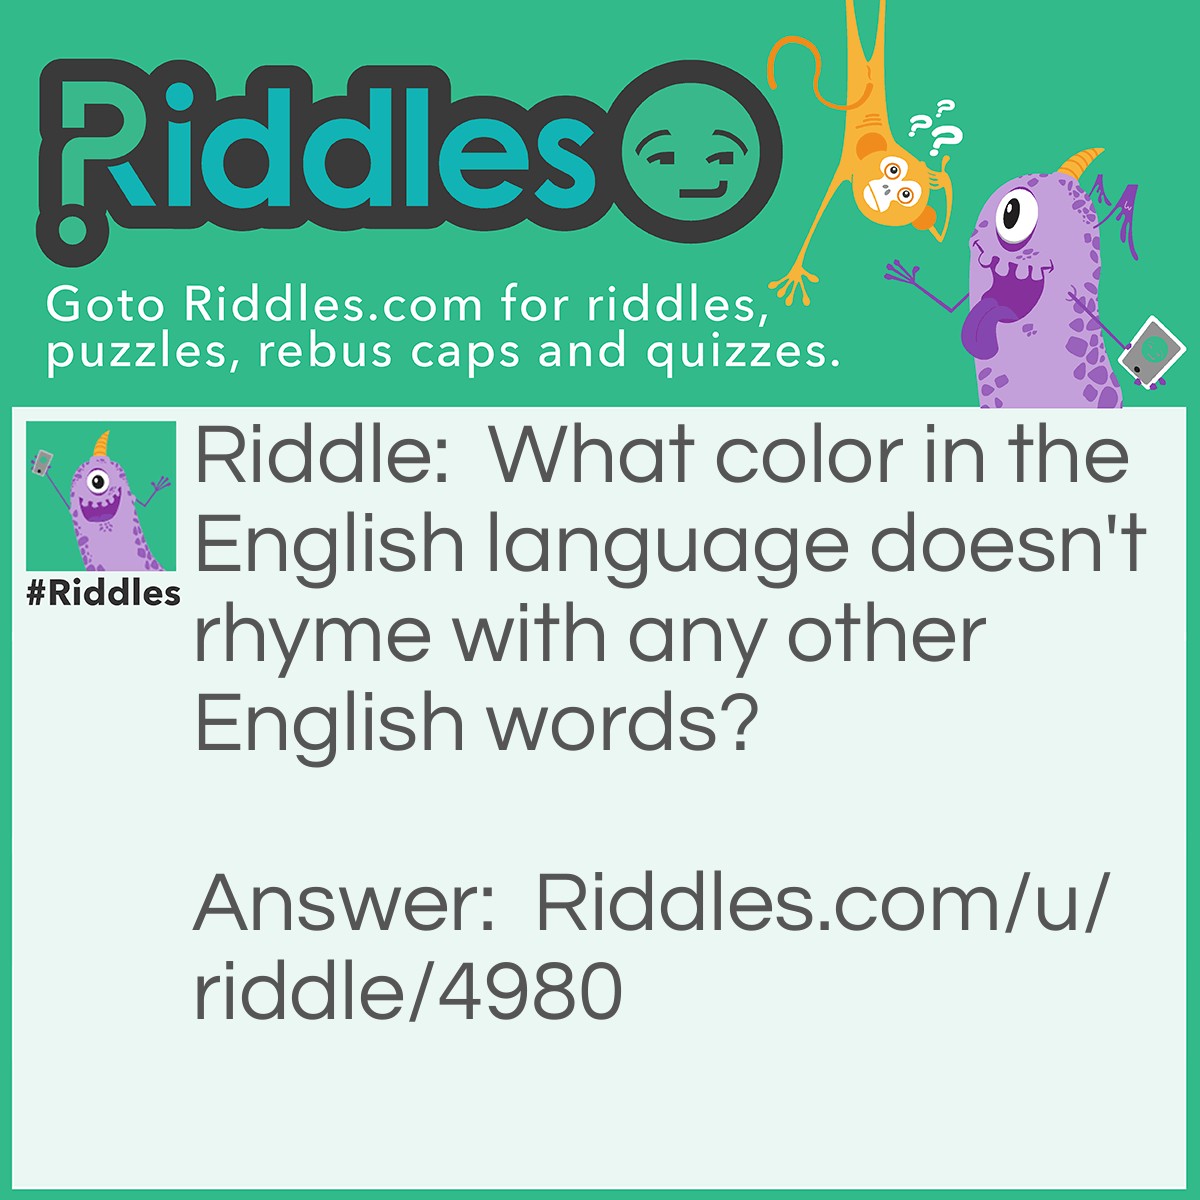 Riddle: What color in the English language doesn't rhyme with any other English words? Answer: Orange!